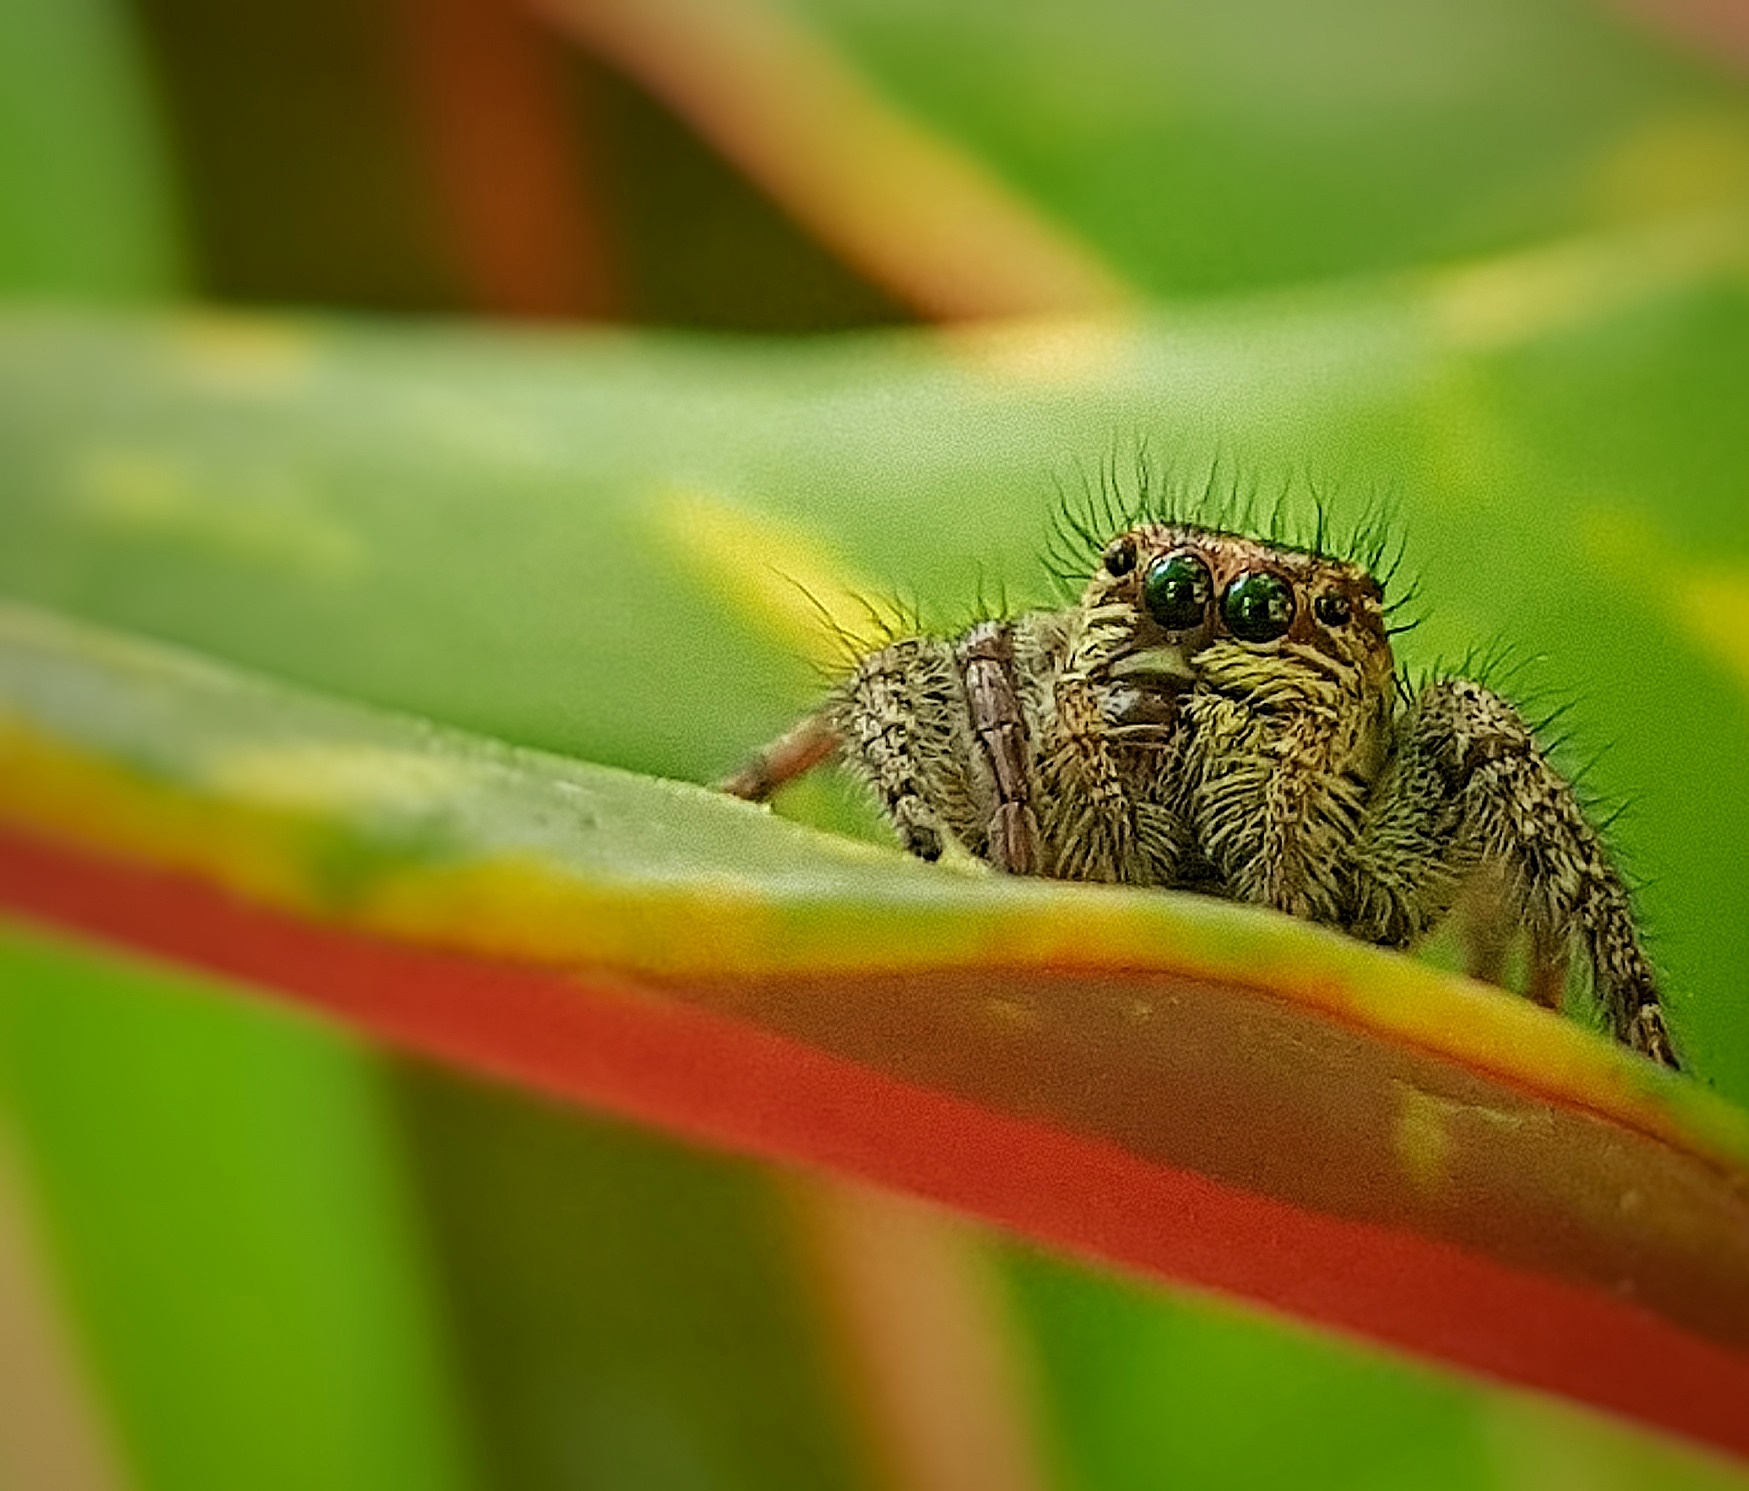 White and brown jumping spider on a colourful leaf